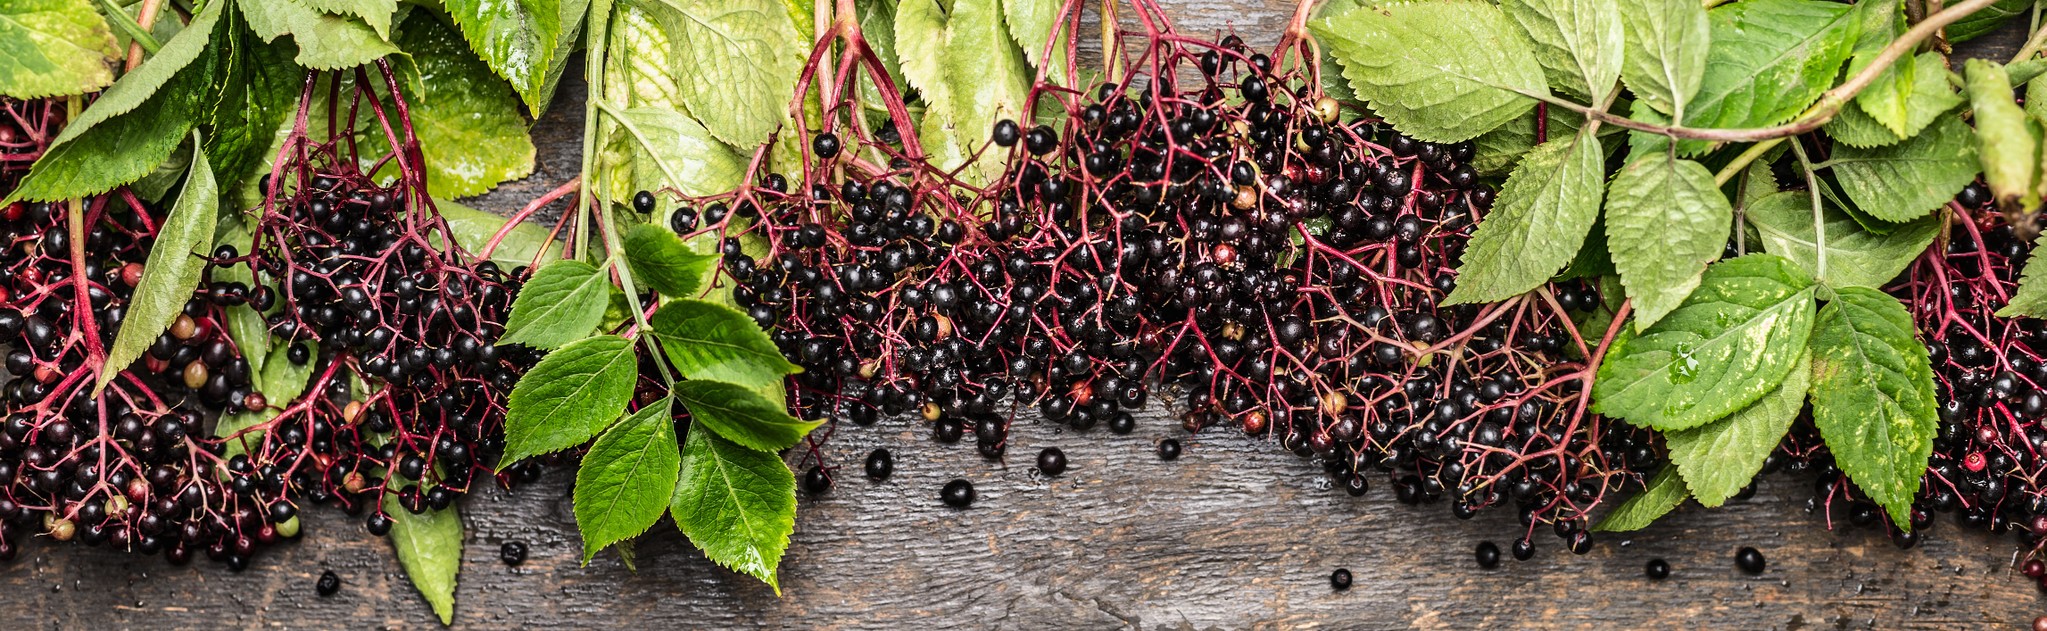 Elderberry berries and leaves on a wood table